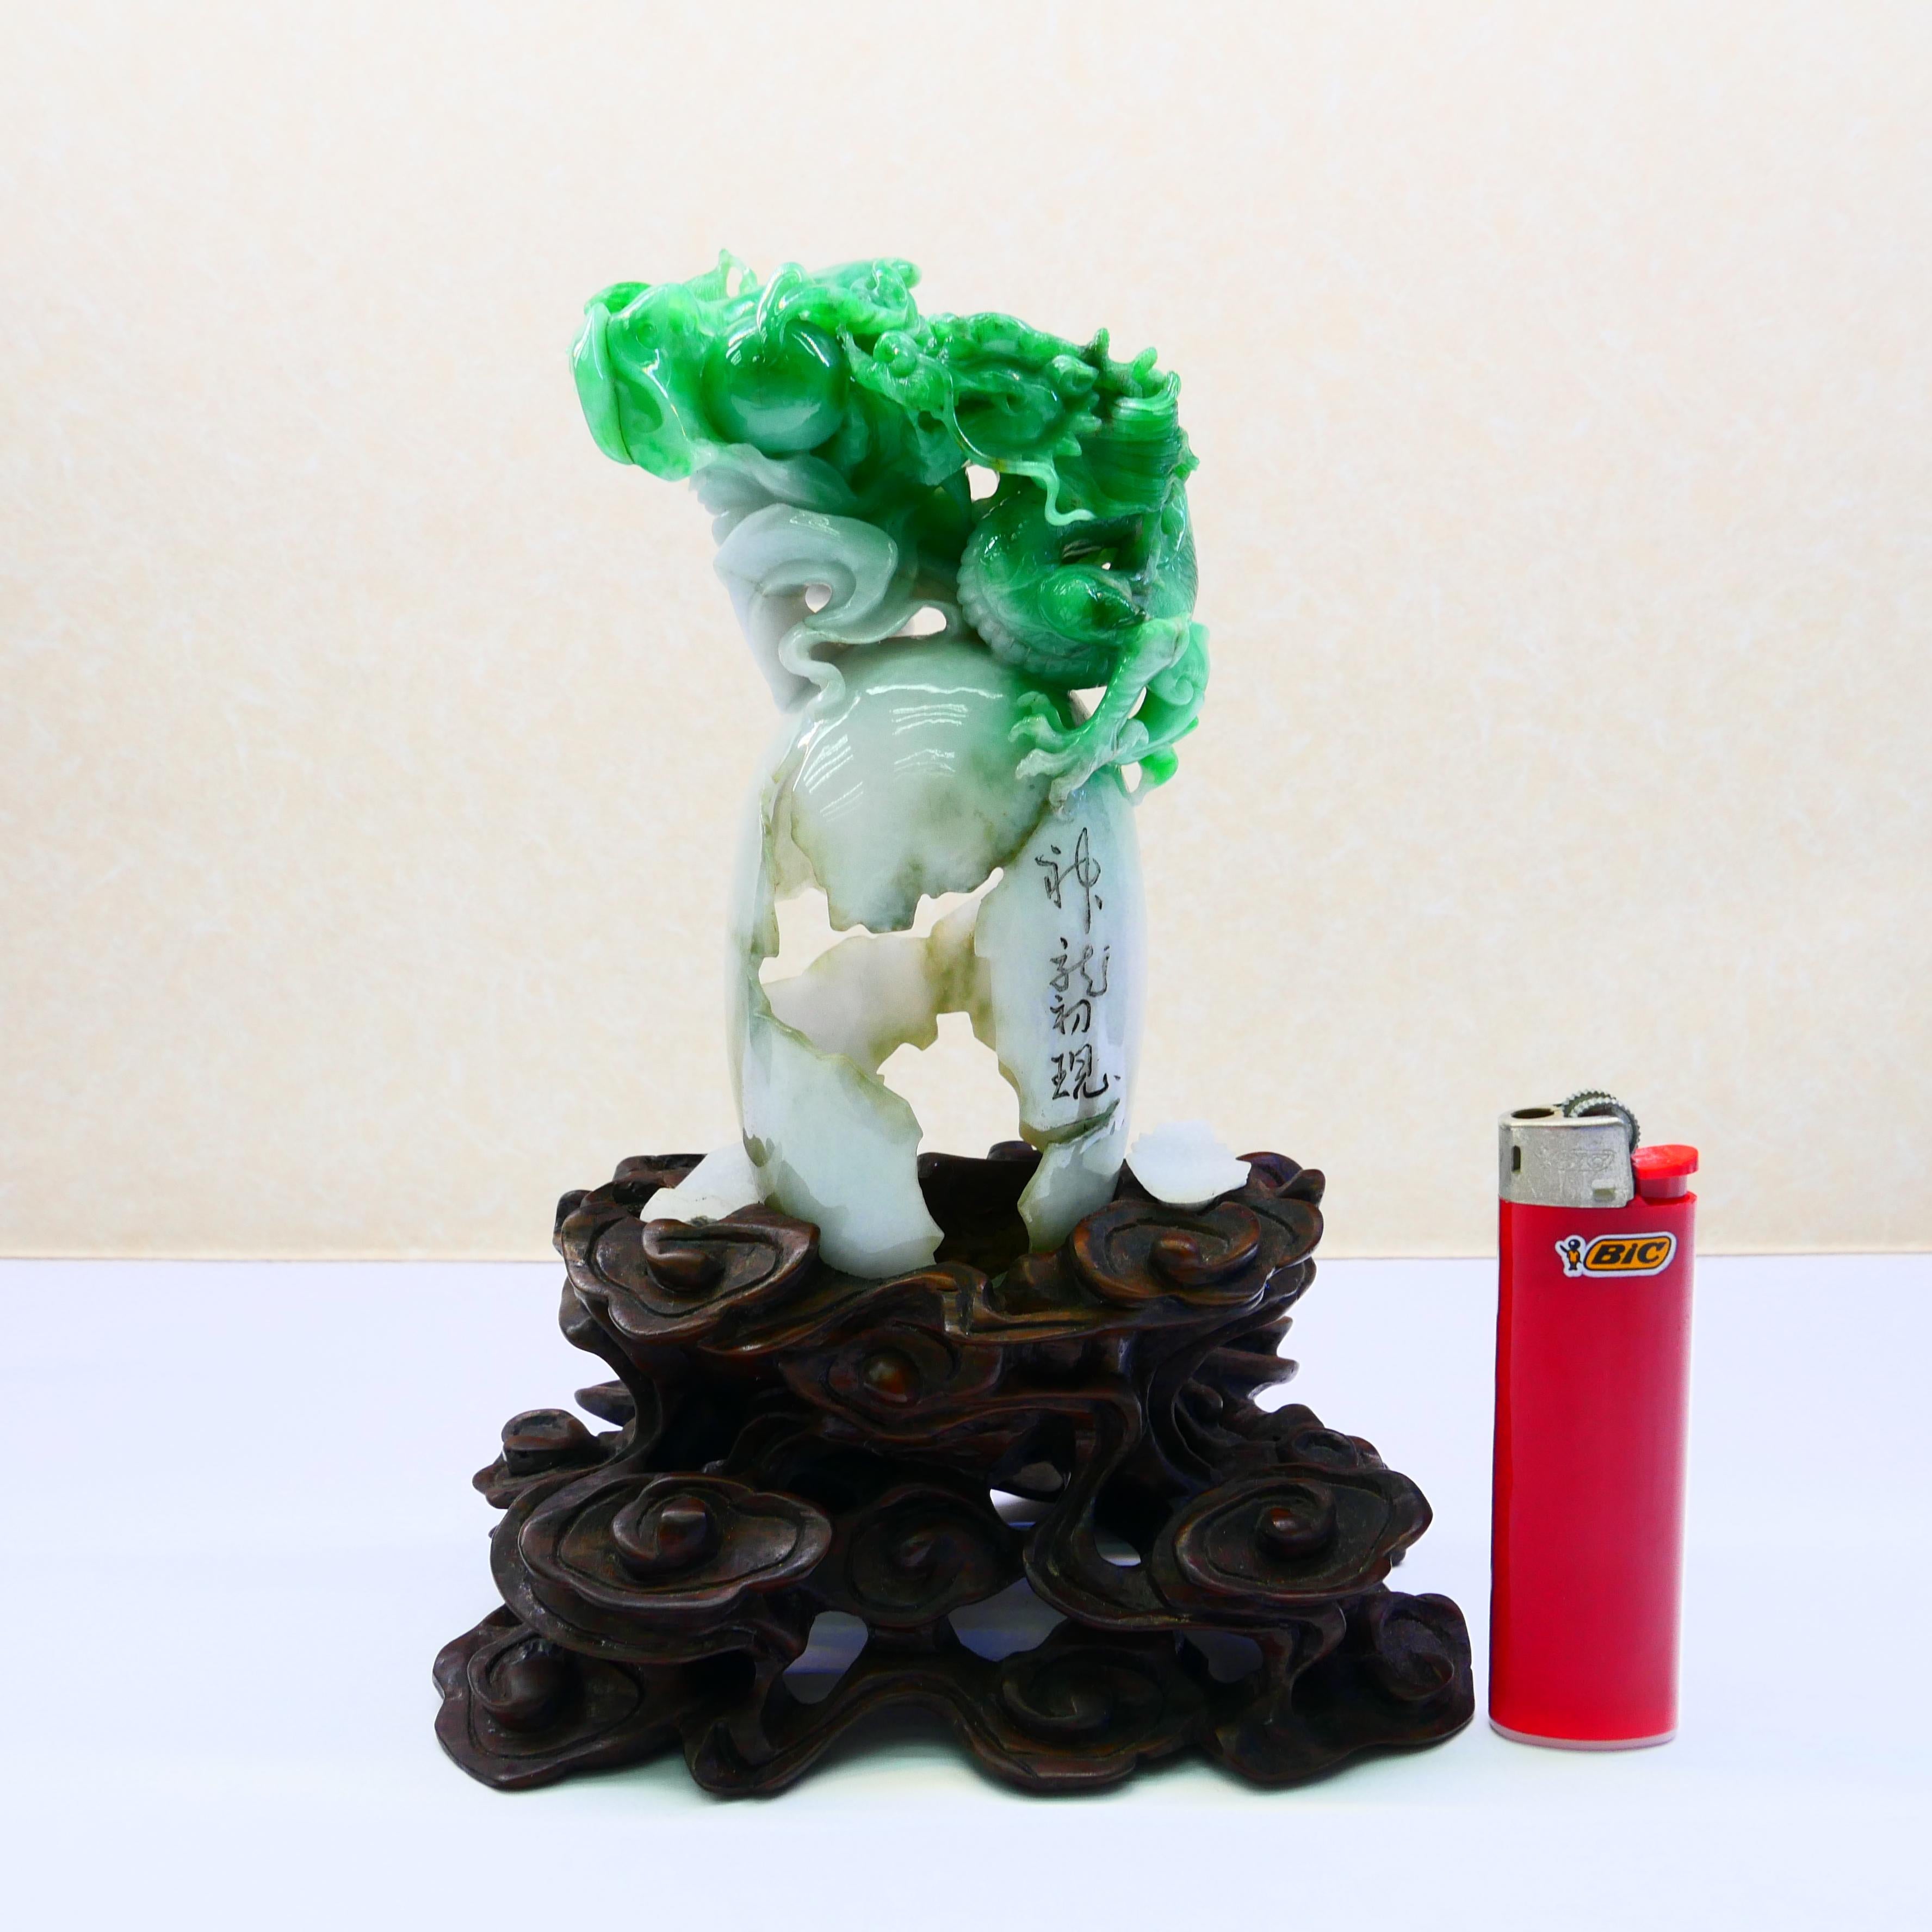 From our extensive Jade collection, here is another one to add to someones important collection. This piece was carved at least 50 years ago! This jade piece is certified natural without treatments or enhancements. It is a superb piece of jade